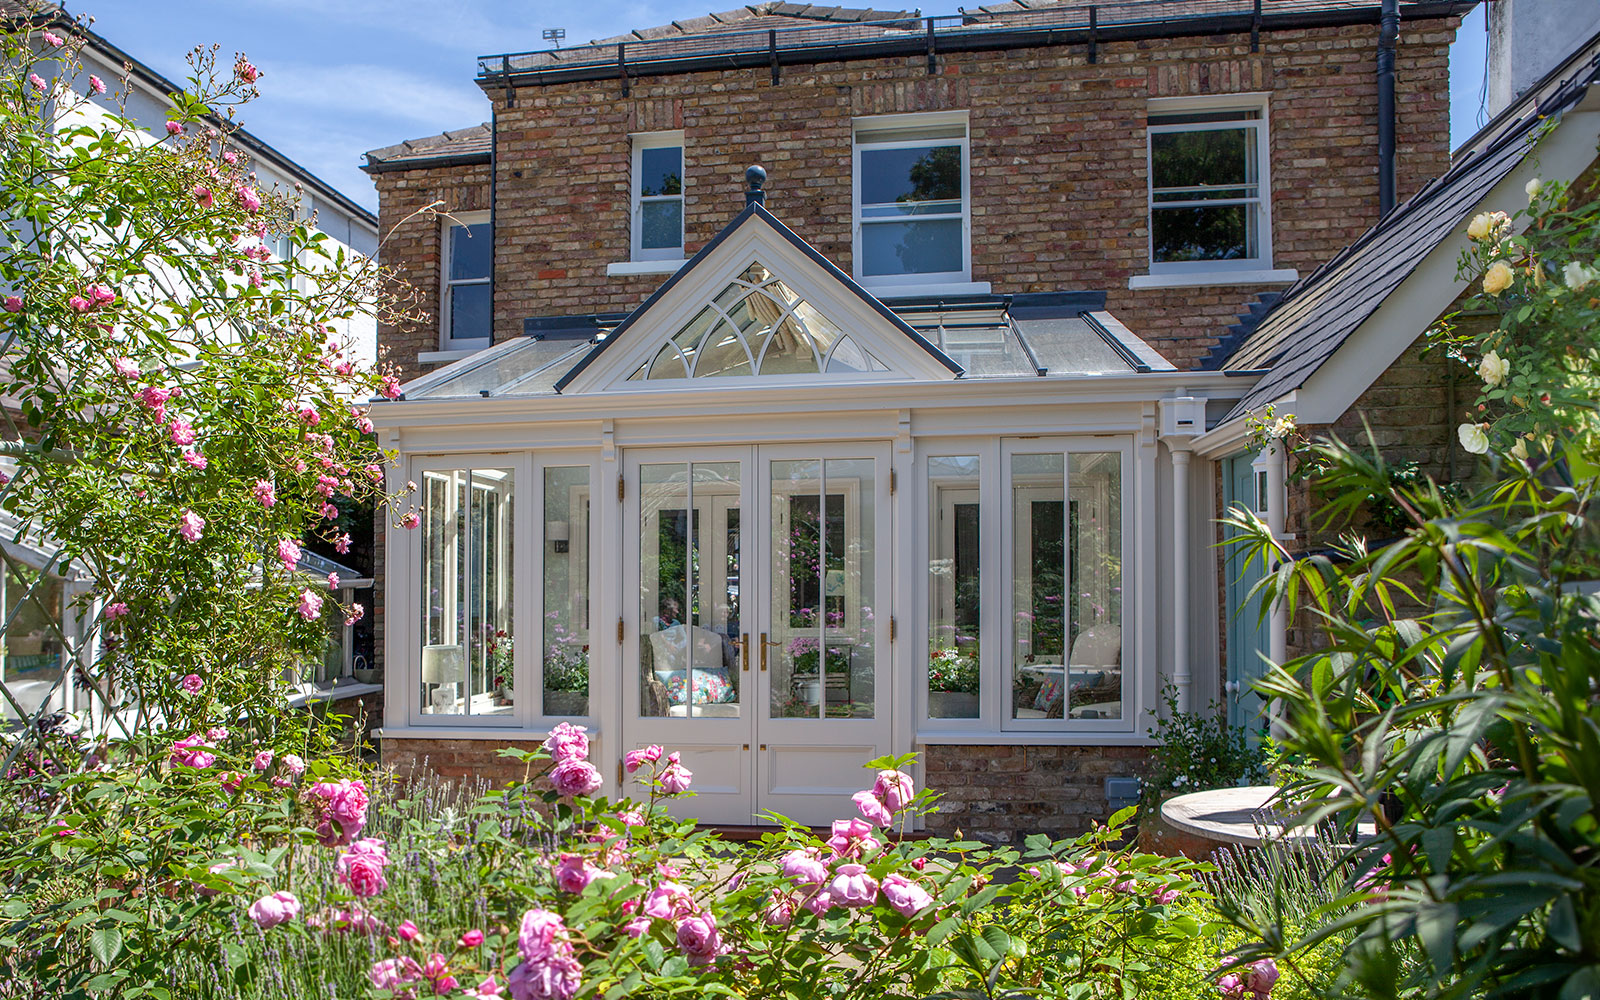 Example of a lean-to conservatory extension